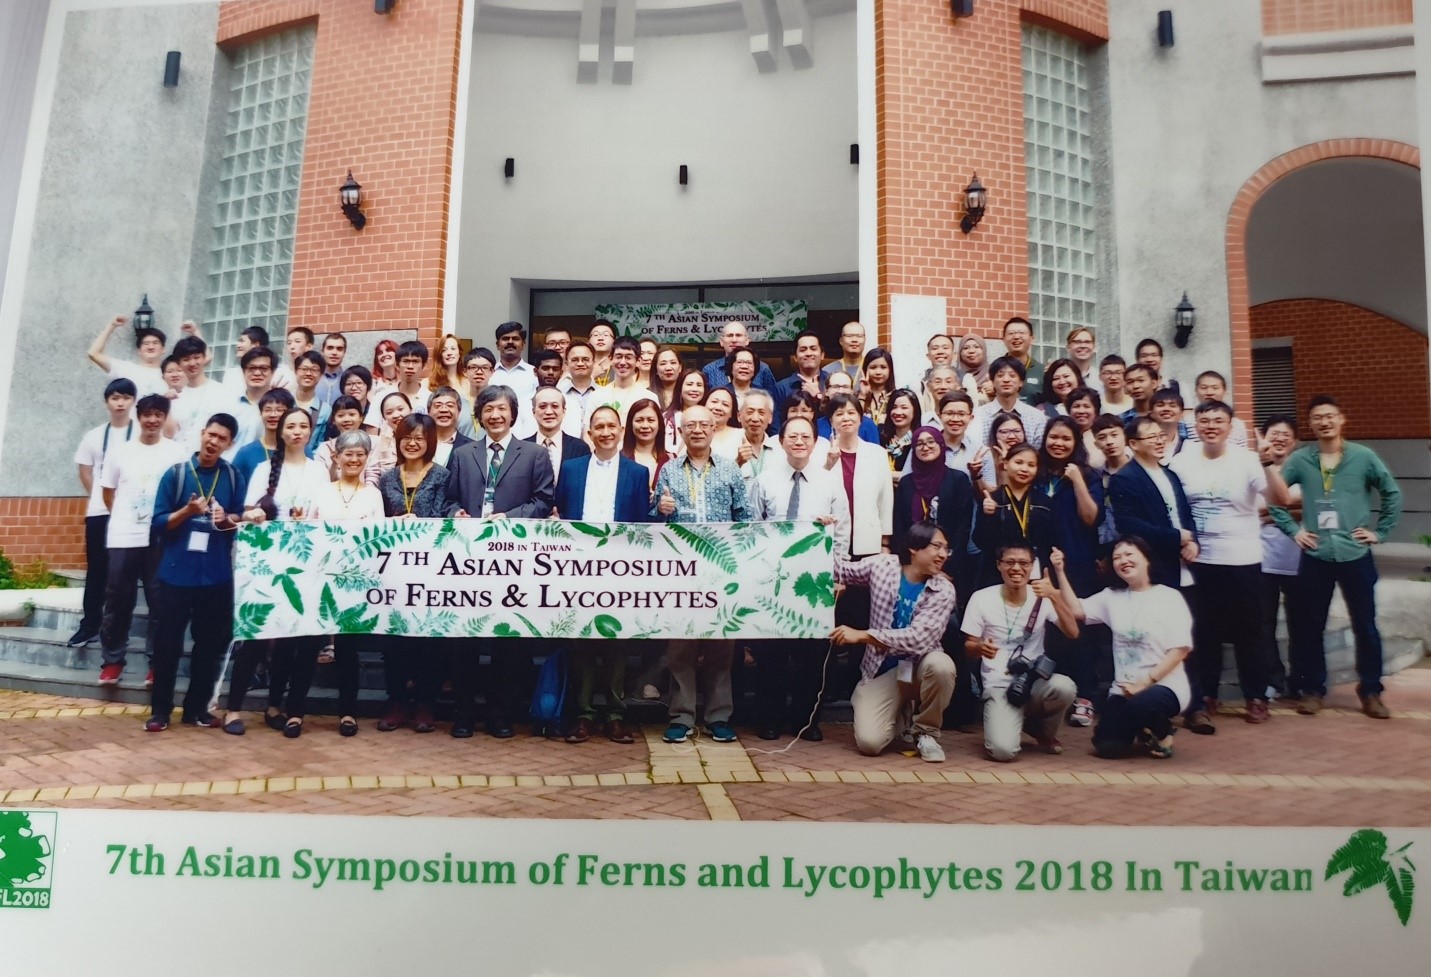 USeP Faculty Present Research in 7th Asian Symposium on Ferns and Lycophytes in Taiwan